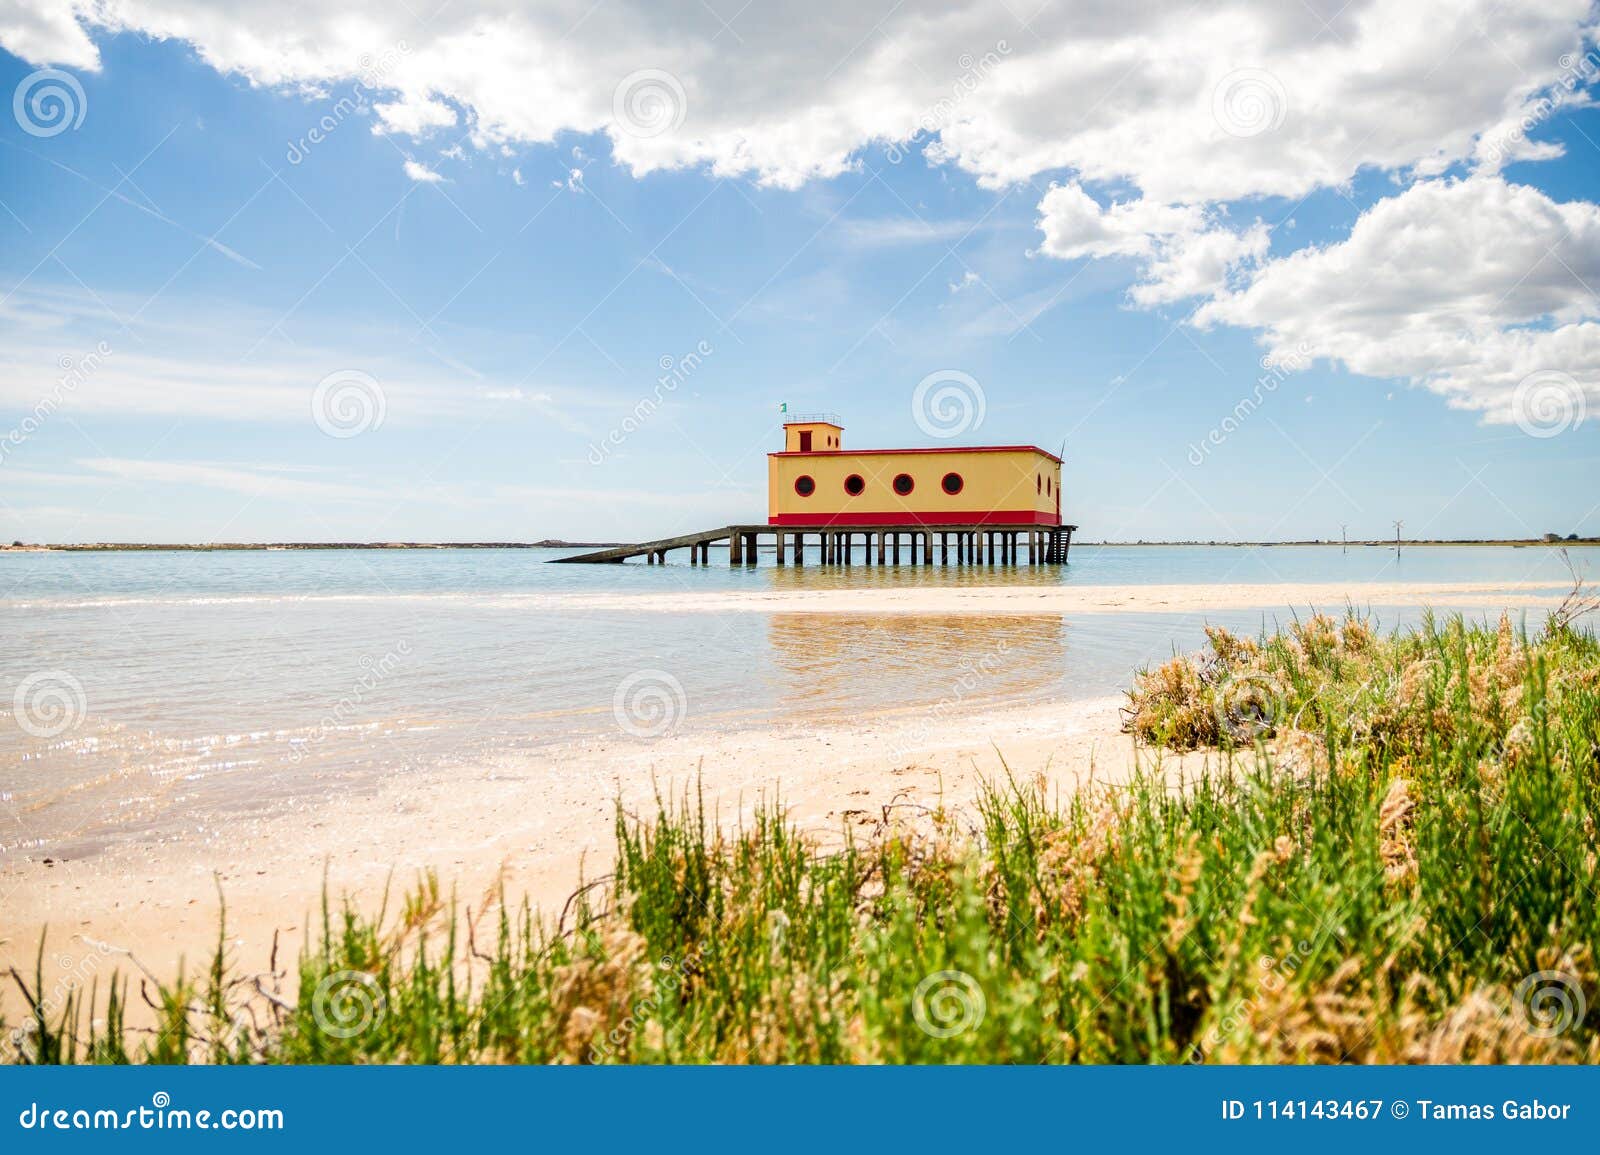 sunny beach view of the historical life-guard building in fuseta, ria formosa natural park, portugal